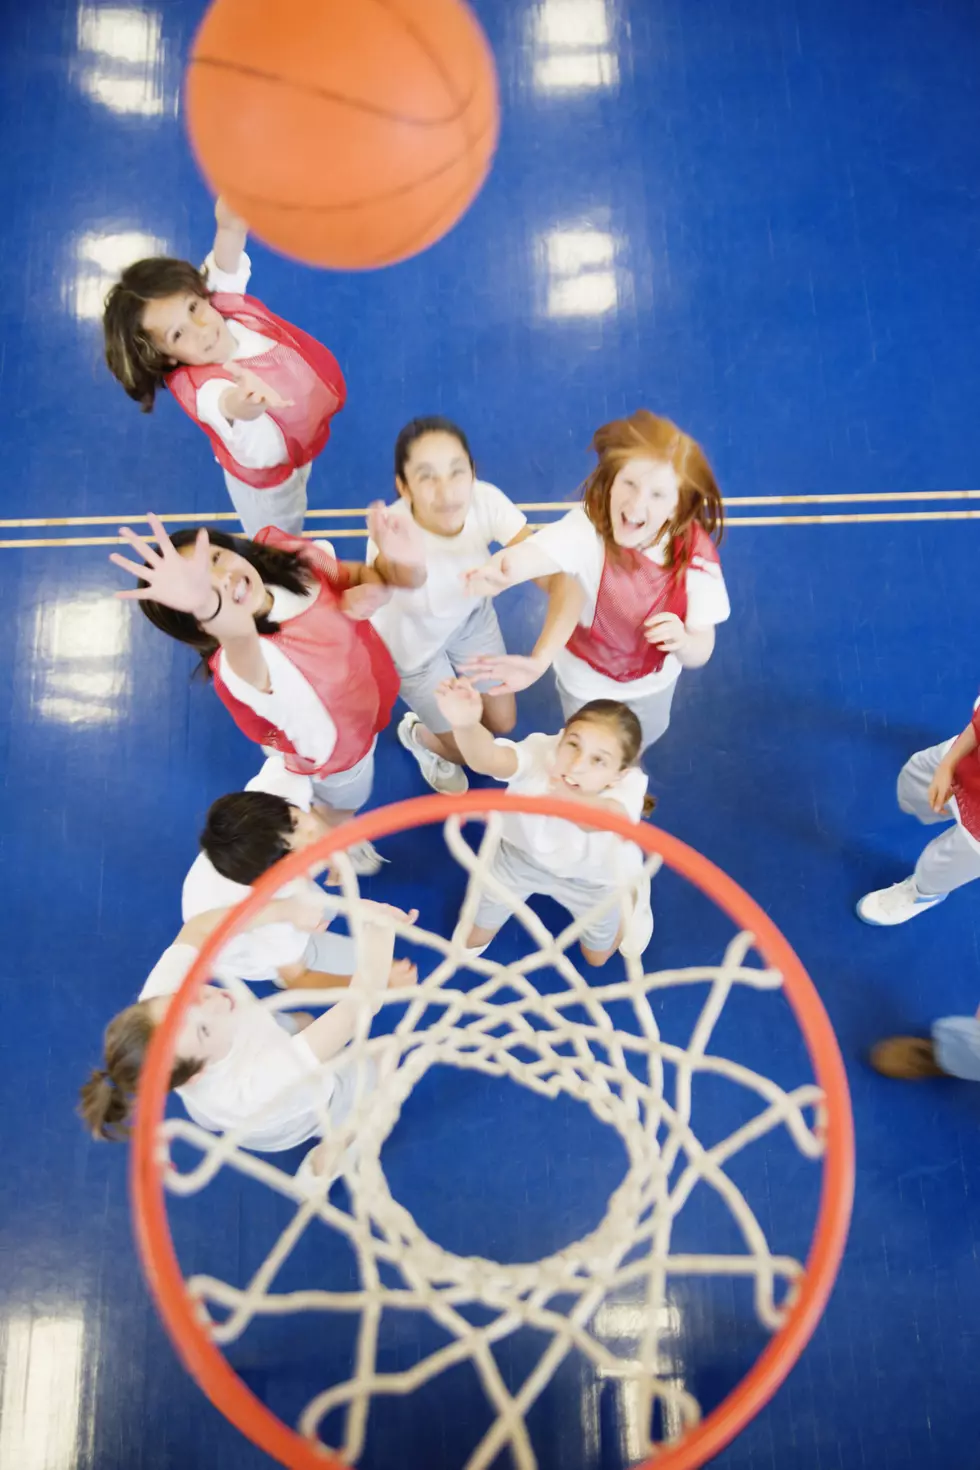 Minnesota Girls Basketball Team Kicked out of League for Being 'Too Good'